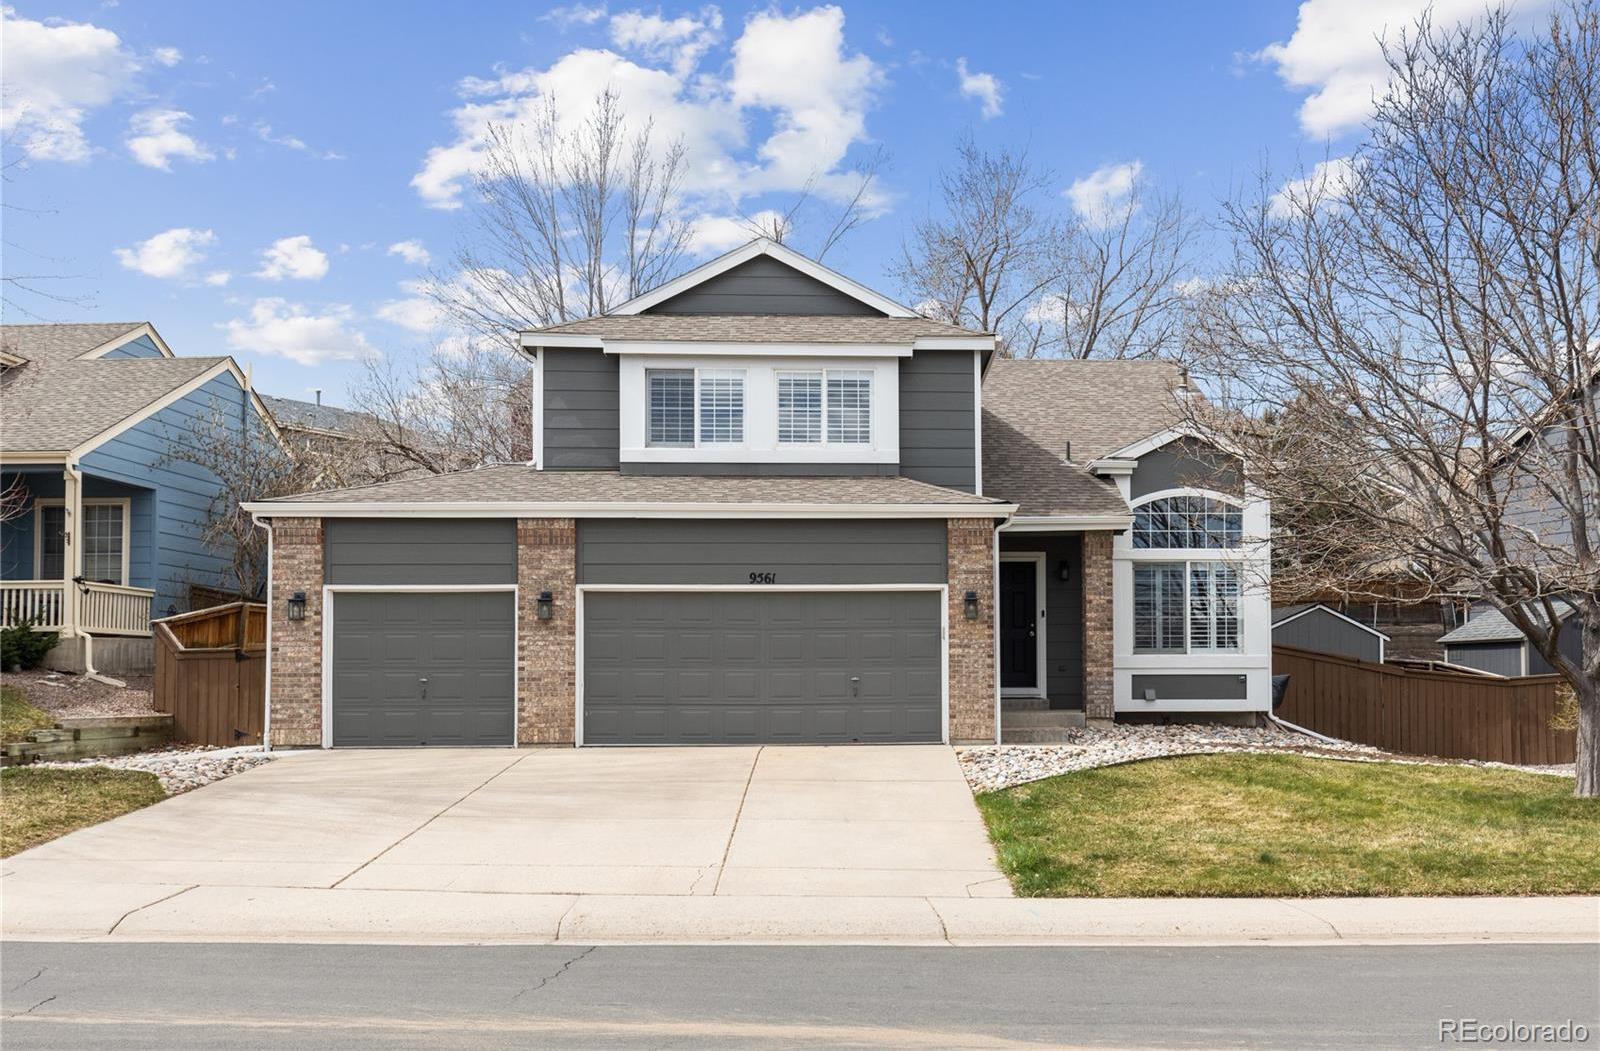 Photo one of 9561 Cove Creek Dr Highlands Ranch CO 80129 | MLS 9256556